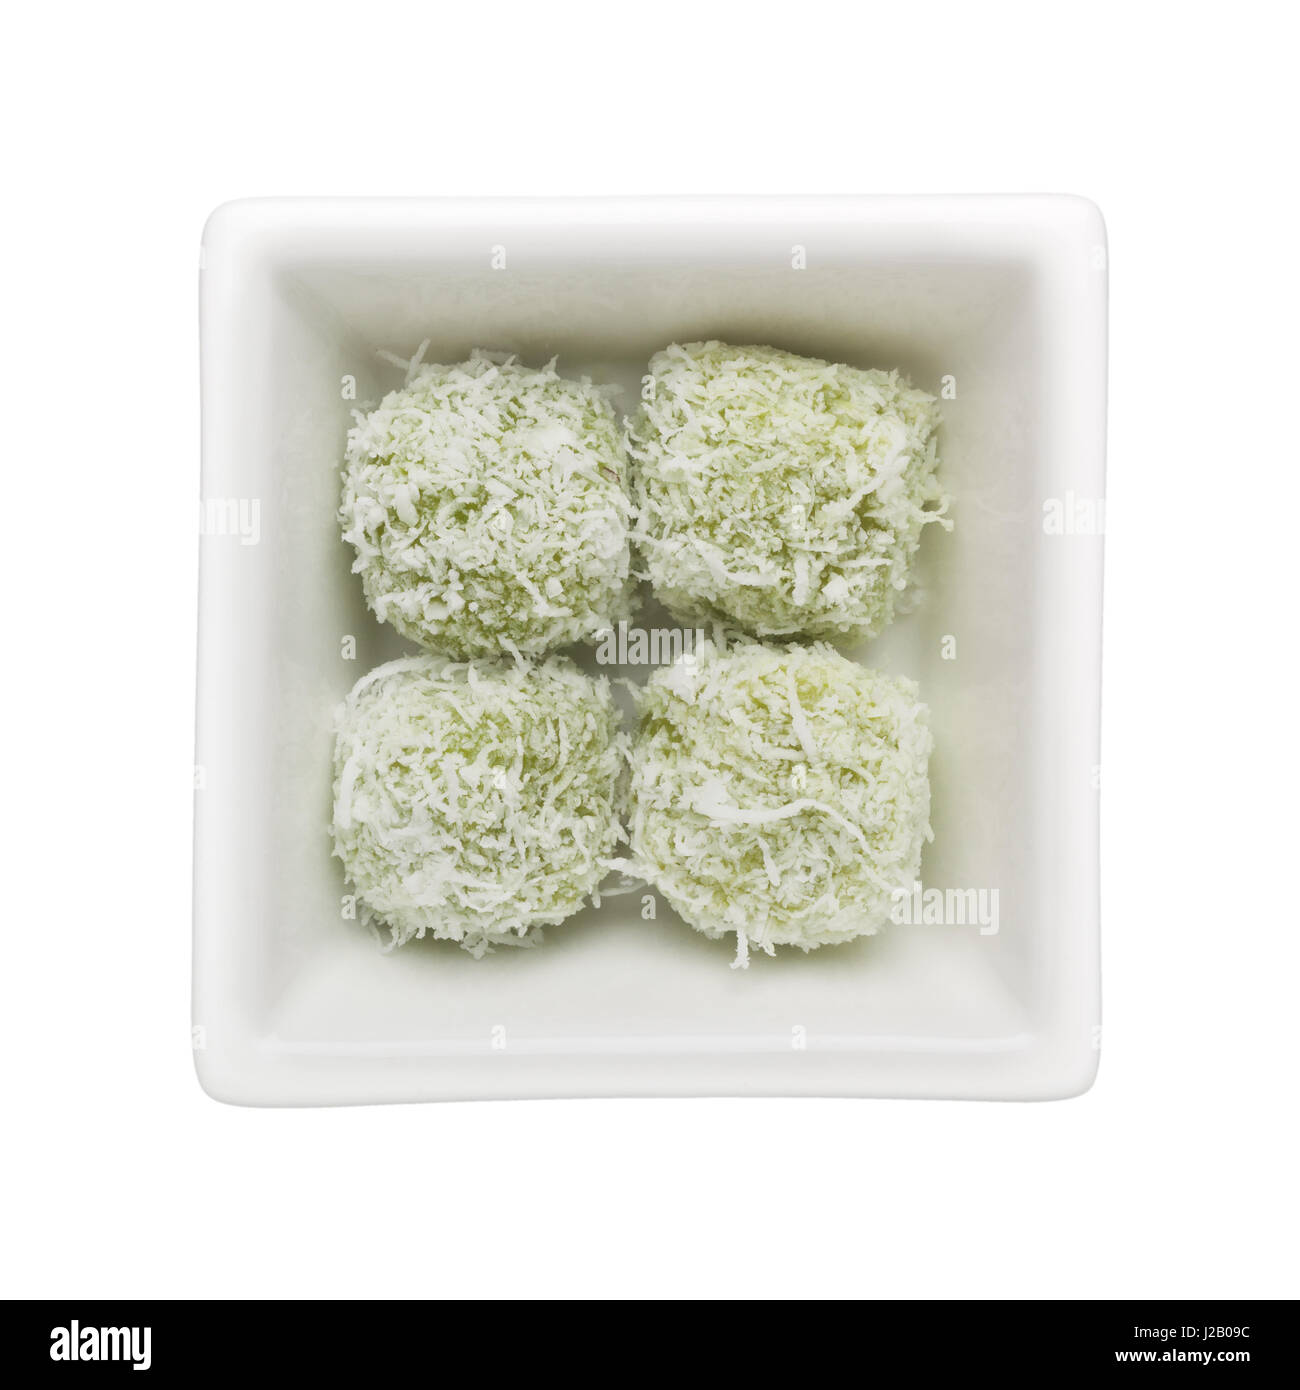 Malay kueh - Ondeh Ondeh in a square bowl isolated on white background Stock Photo